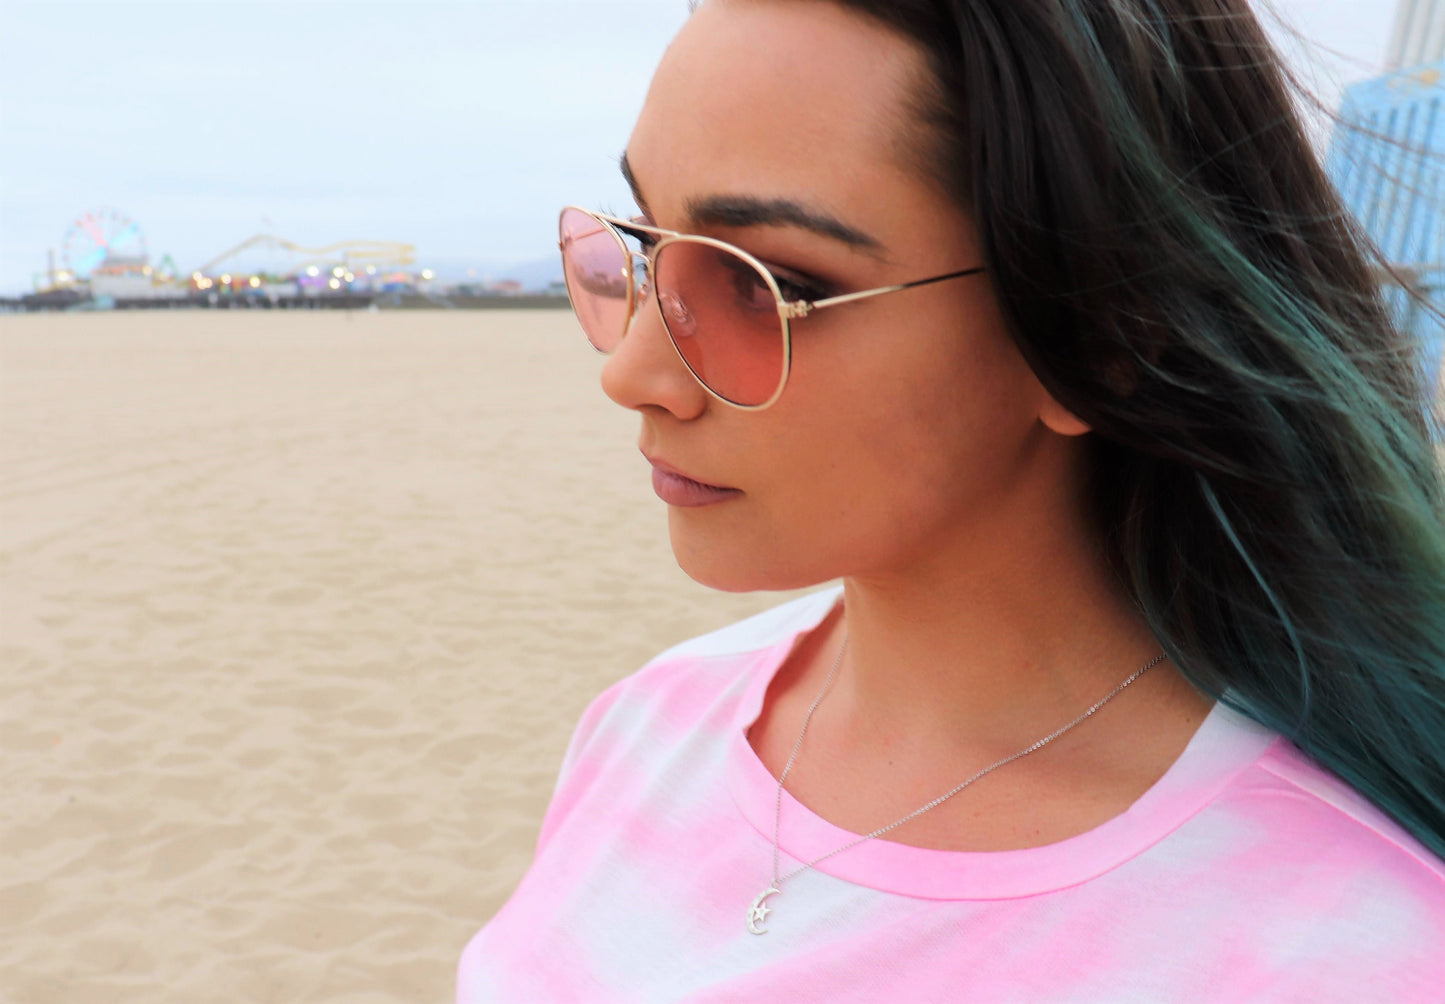  woman at beach with sunglasses and pink tie-dye shirt wearing sun and moon diamond pendant